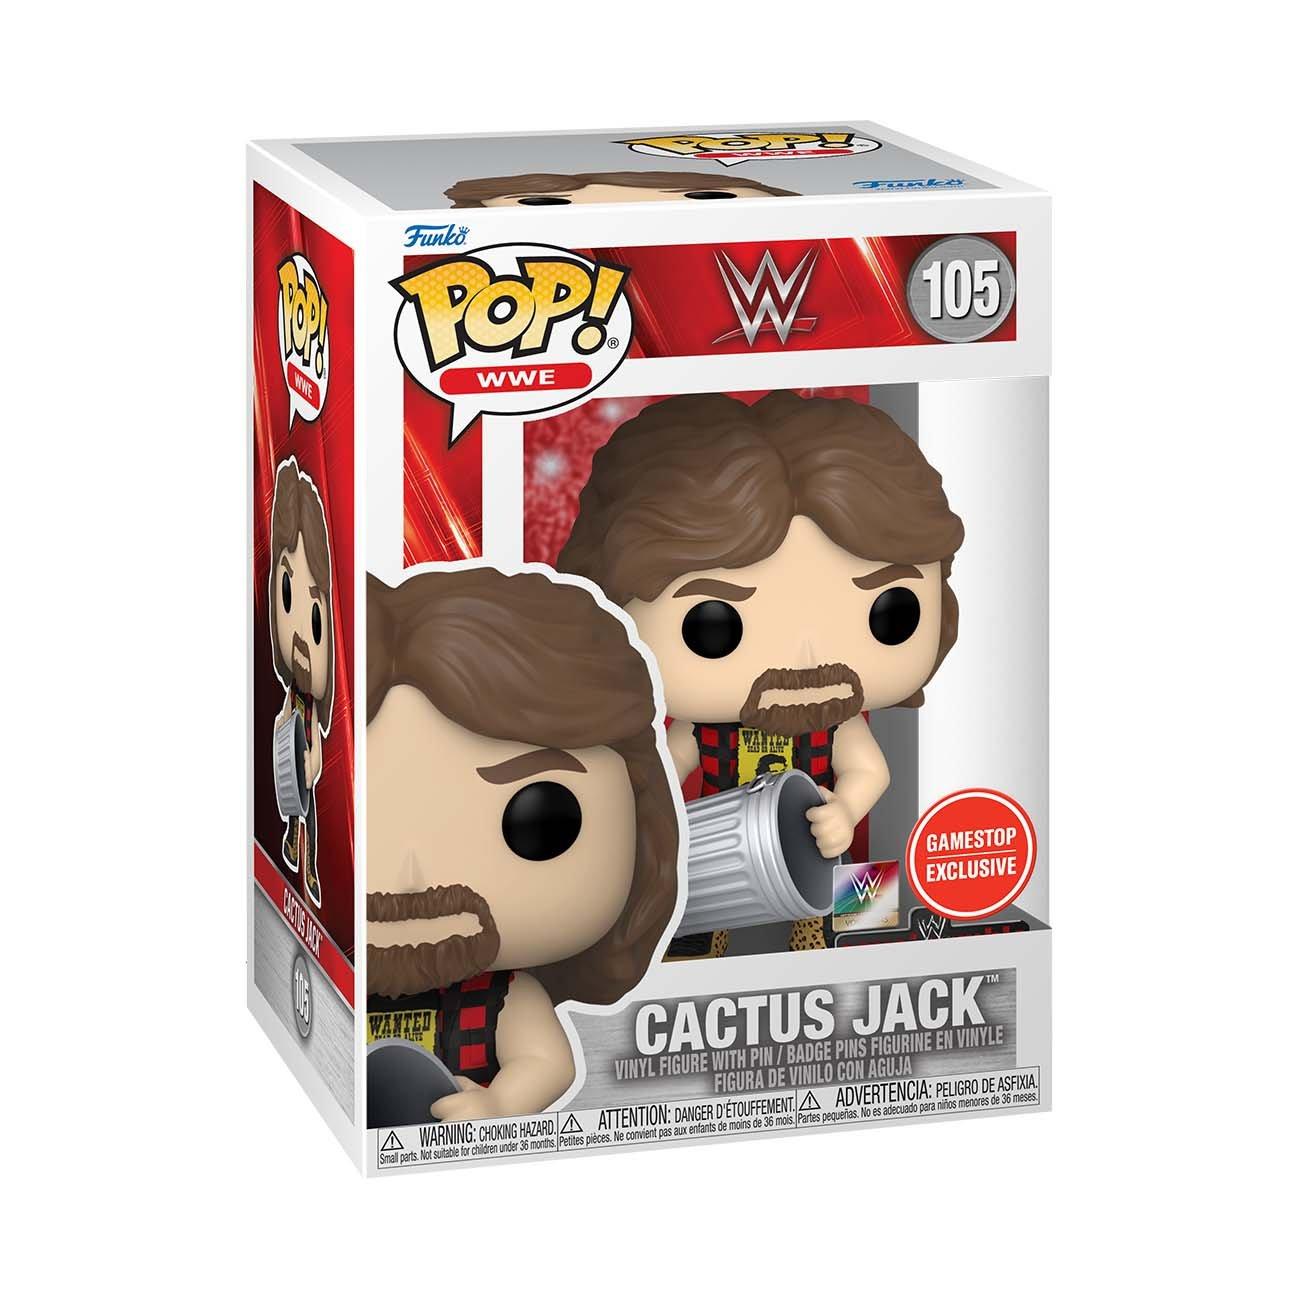 Funko POP! and Pin: WWE Cactus Jack with Trash Can GameStop Exclusive